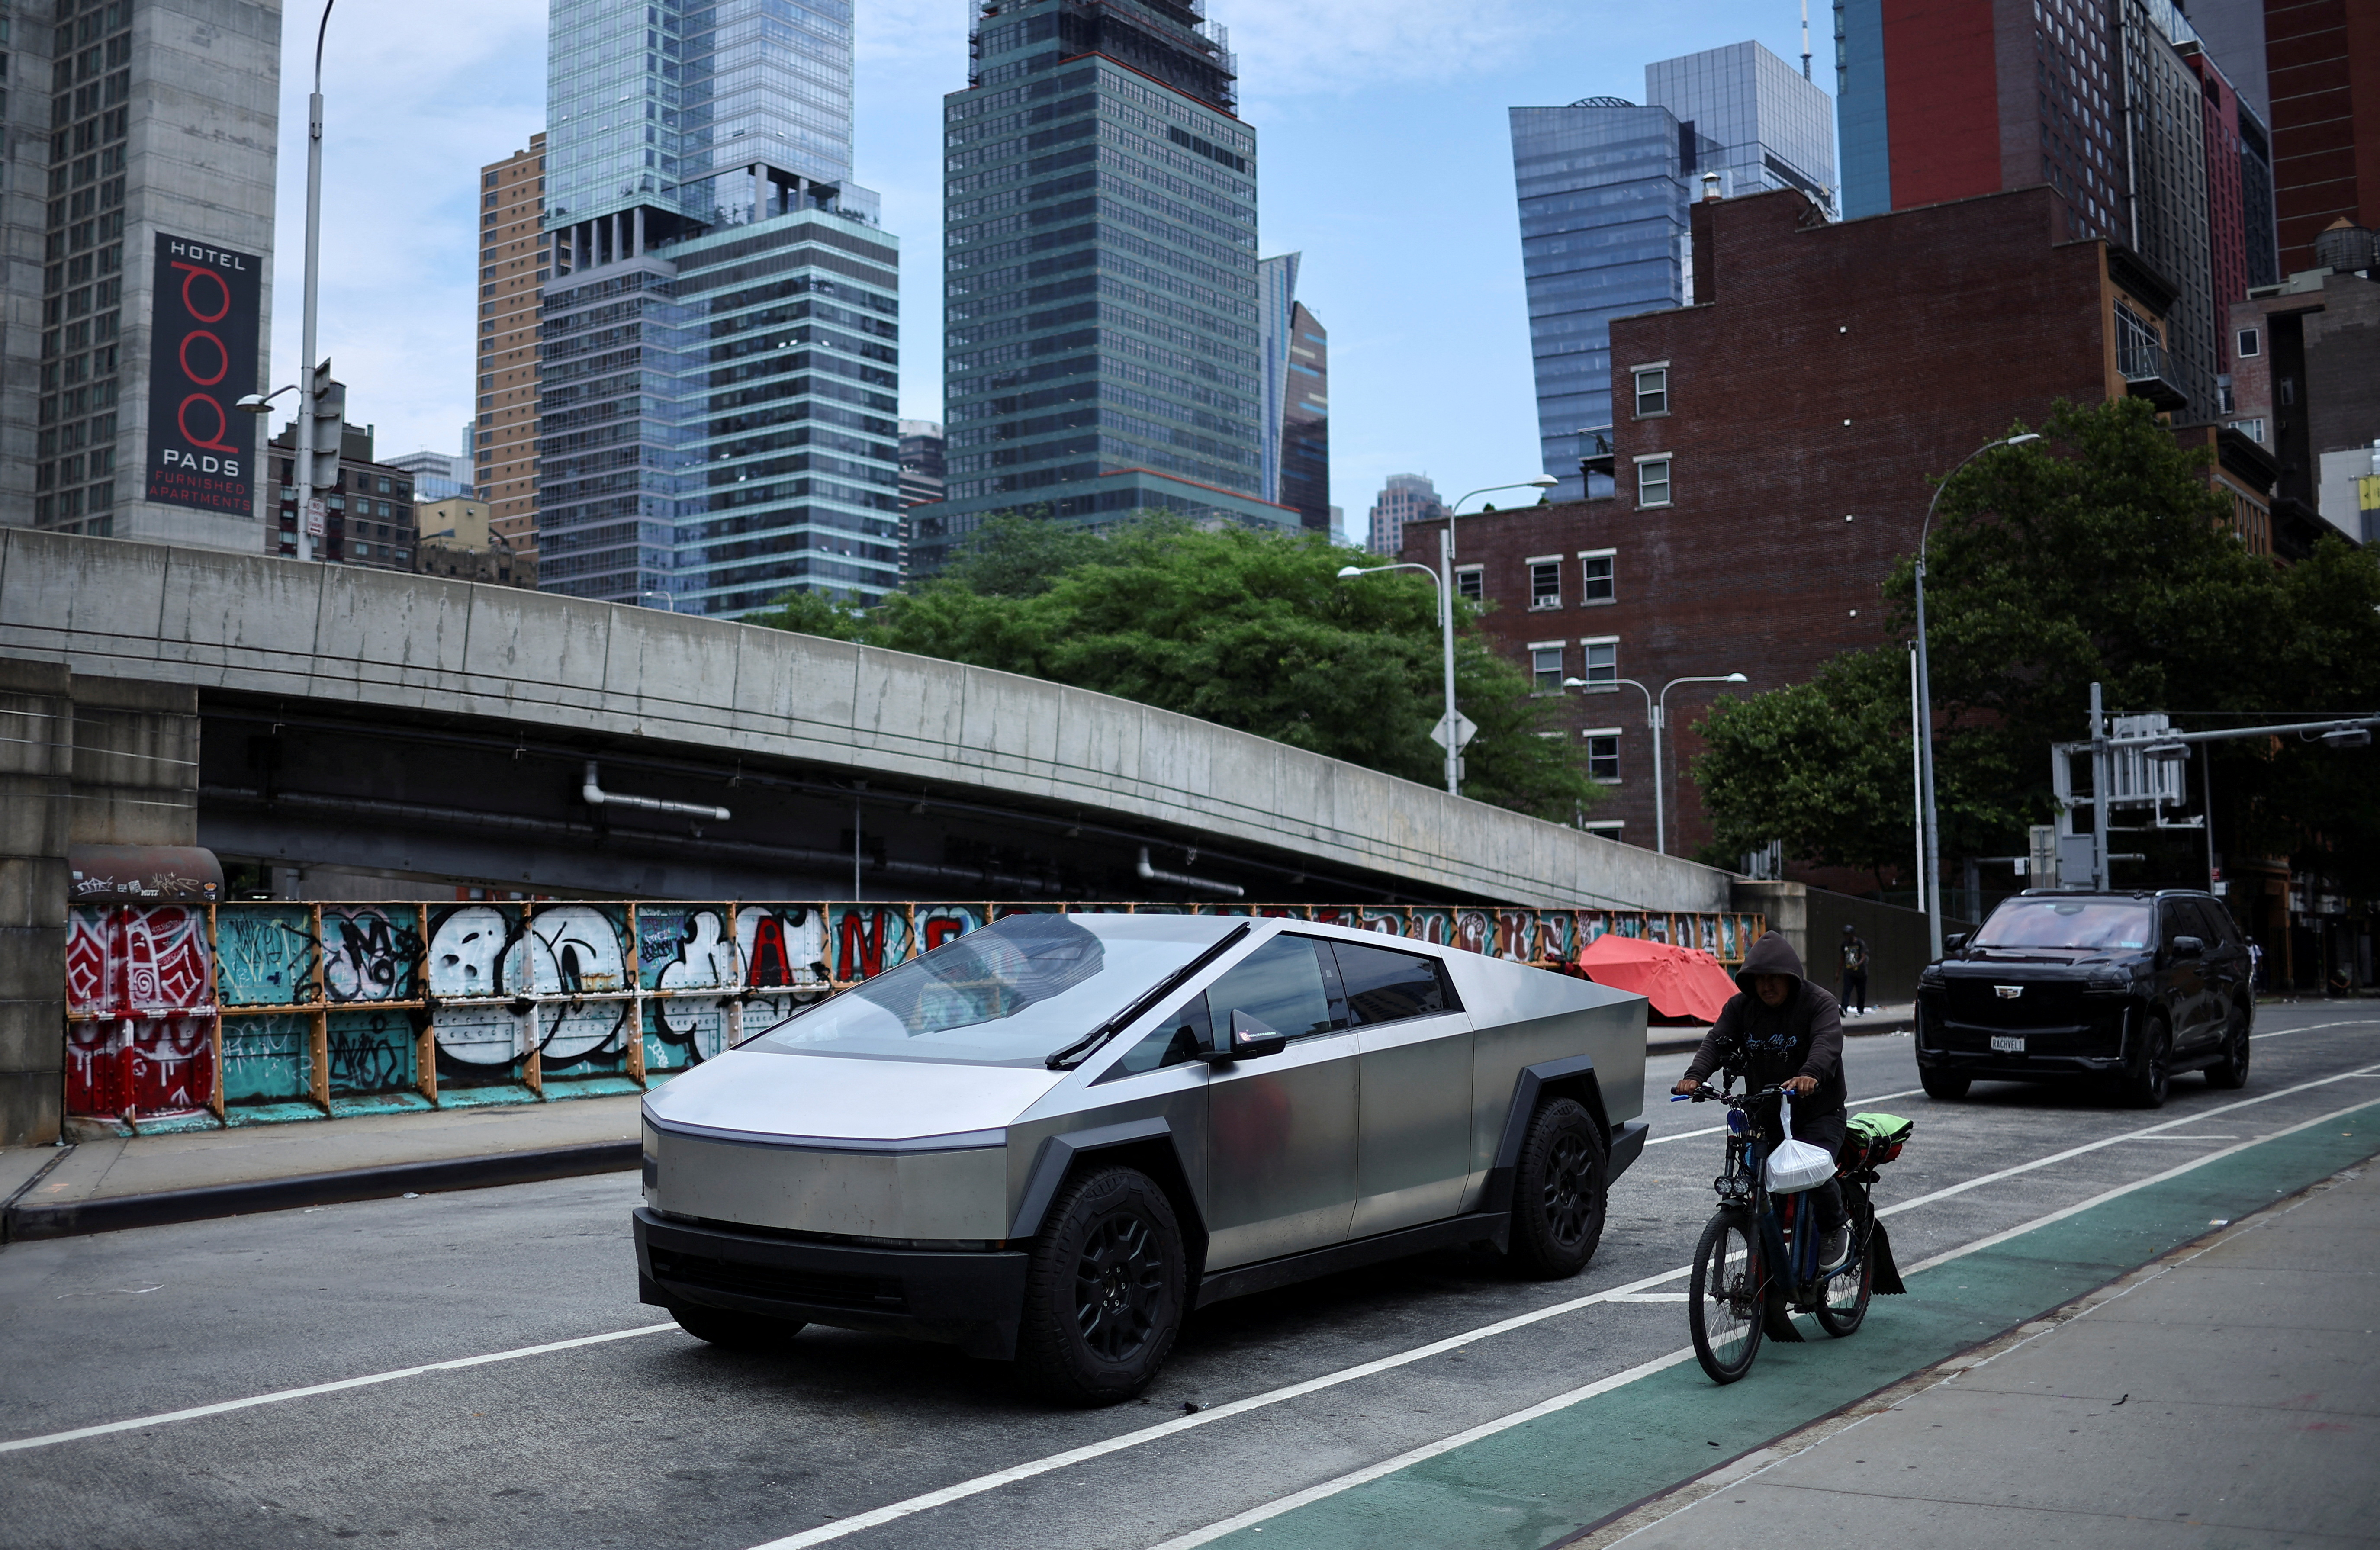 A Tesla Cybertruck is pictured parked in New York City